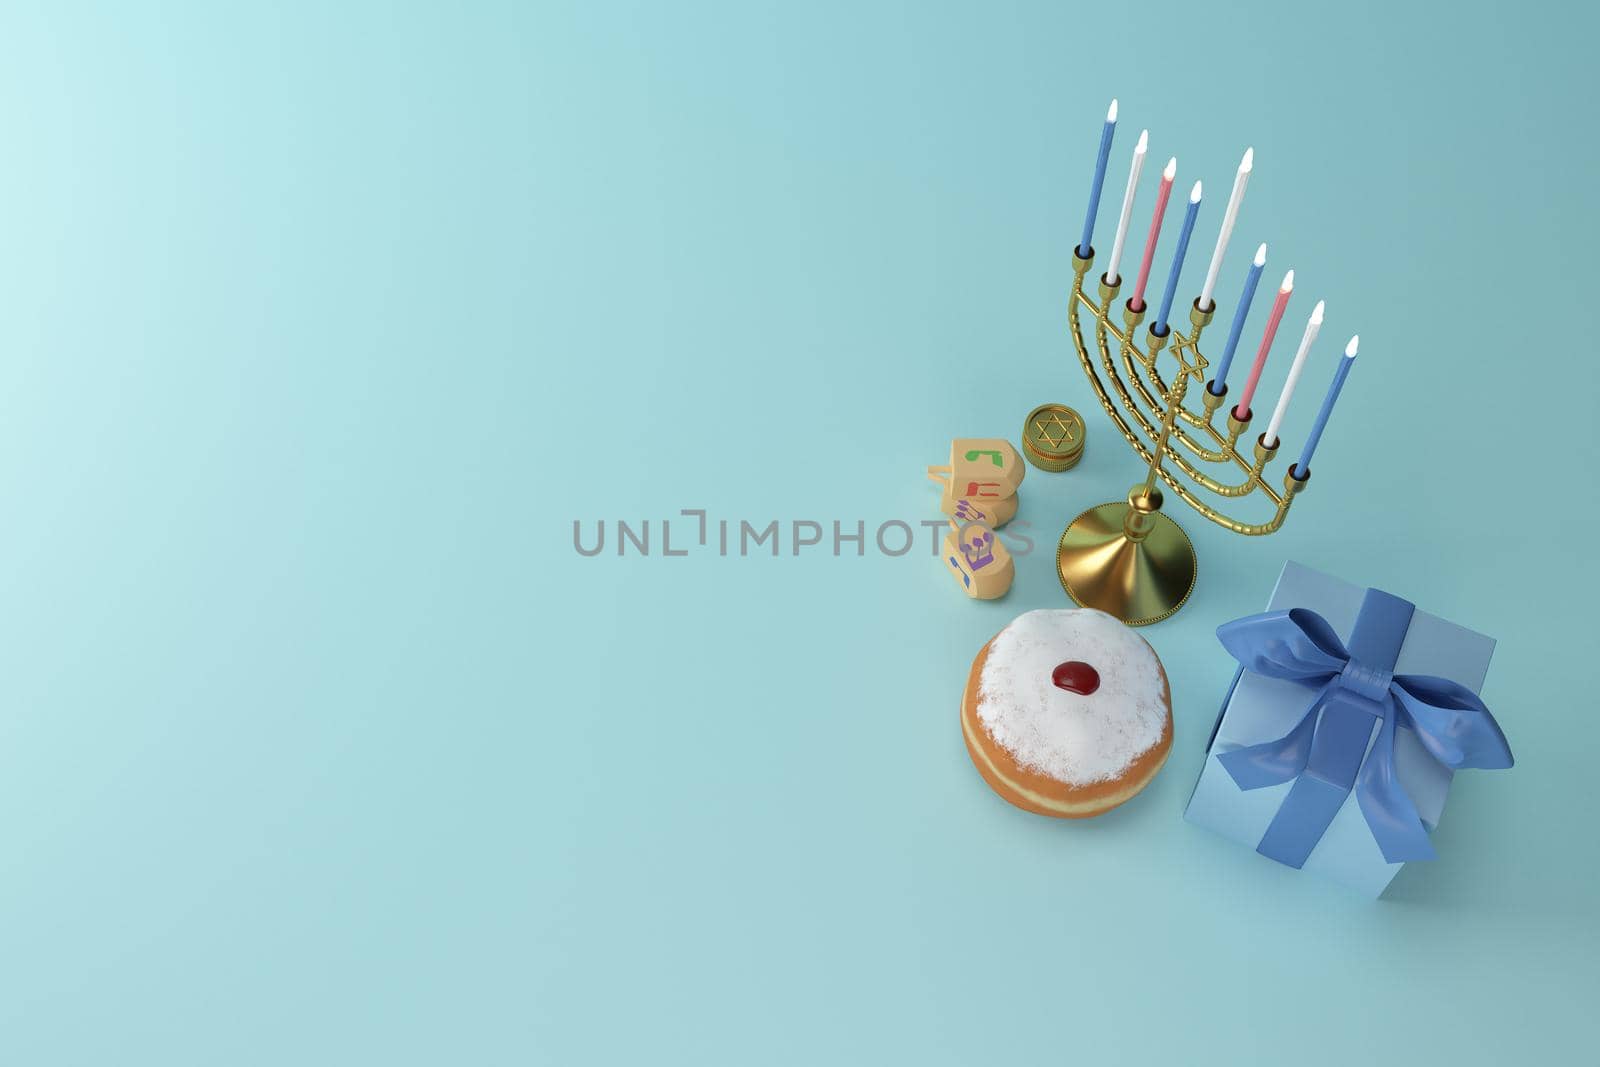 3d rendering Image of Jewish holiday Hanukkah with menorah or traditional Candelabra,gif box, jar ,gold coin and wooden dreidels or spinning top on a  blue background. by put3d